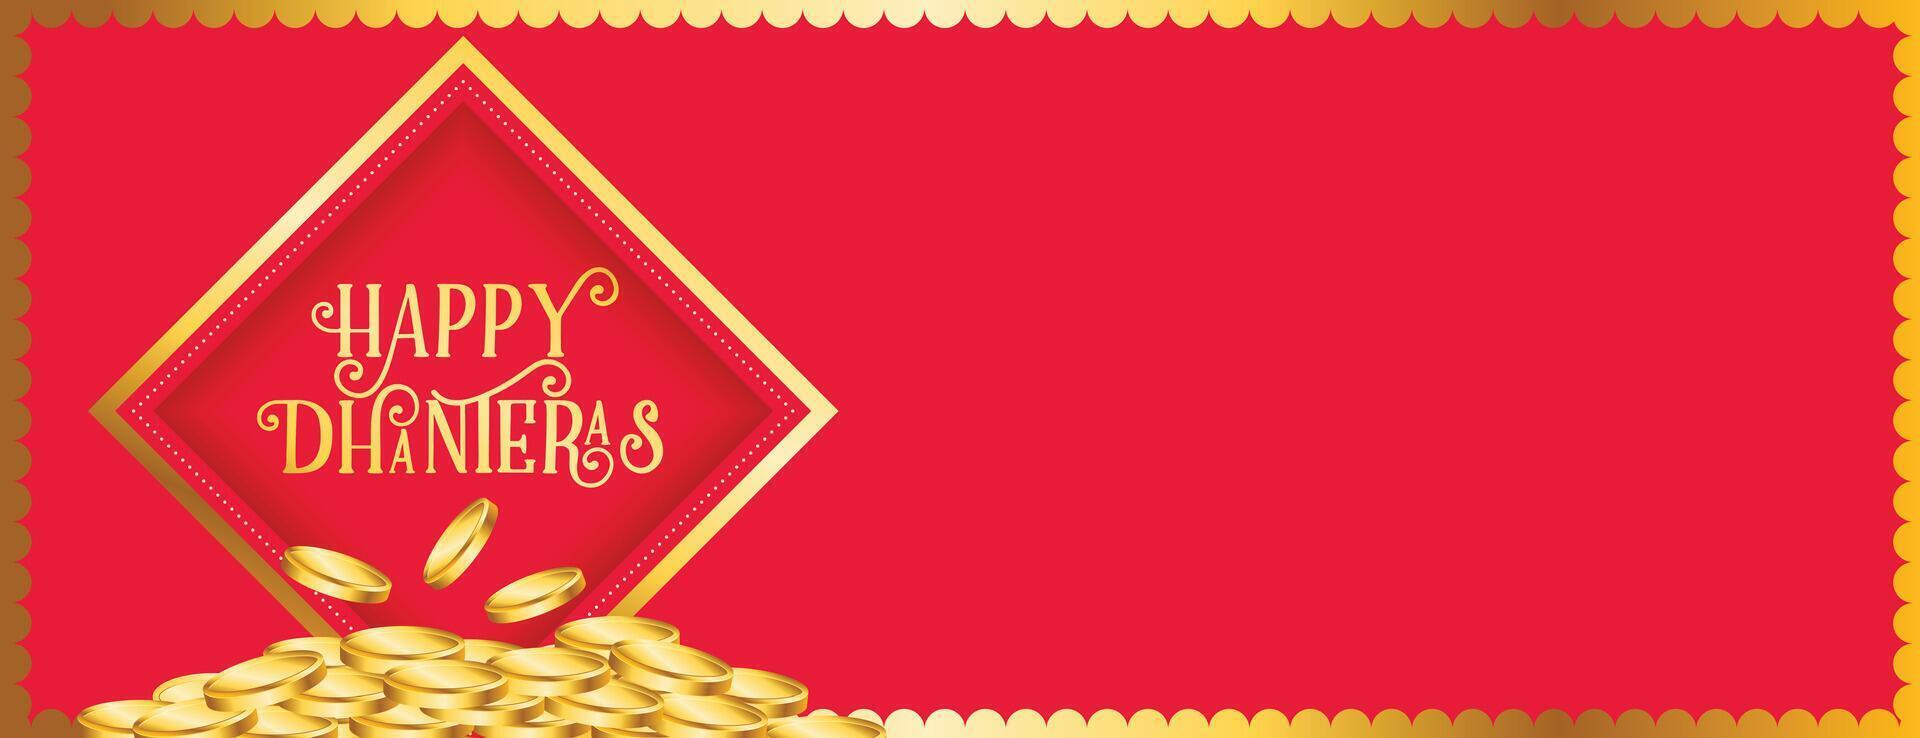 beautiful hindu festival happy dhanteras event poster with golden coin vector